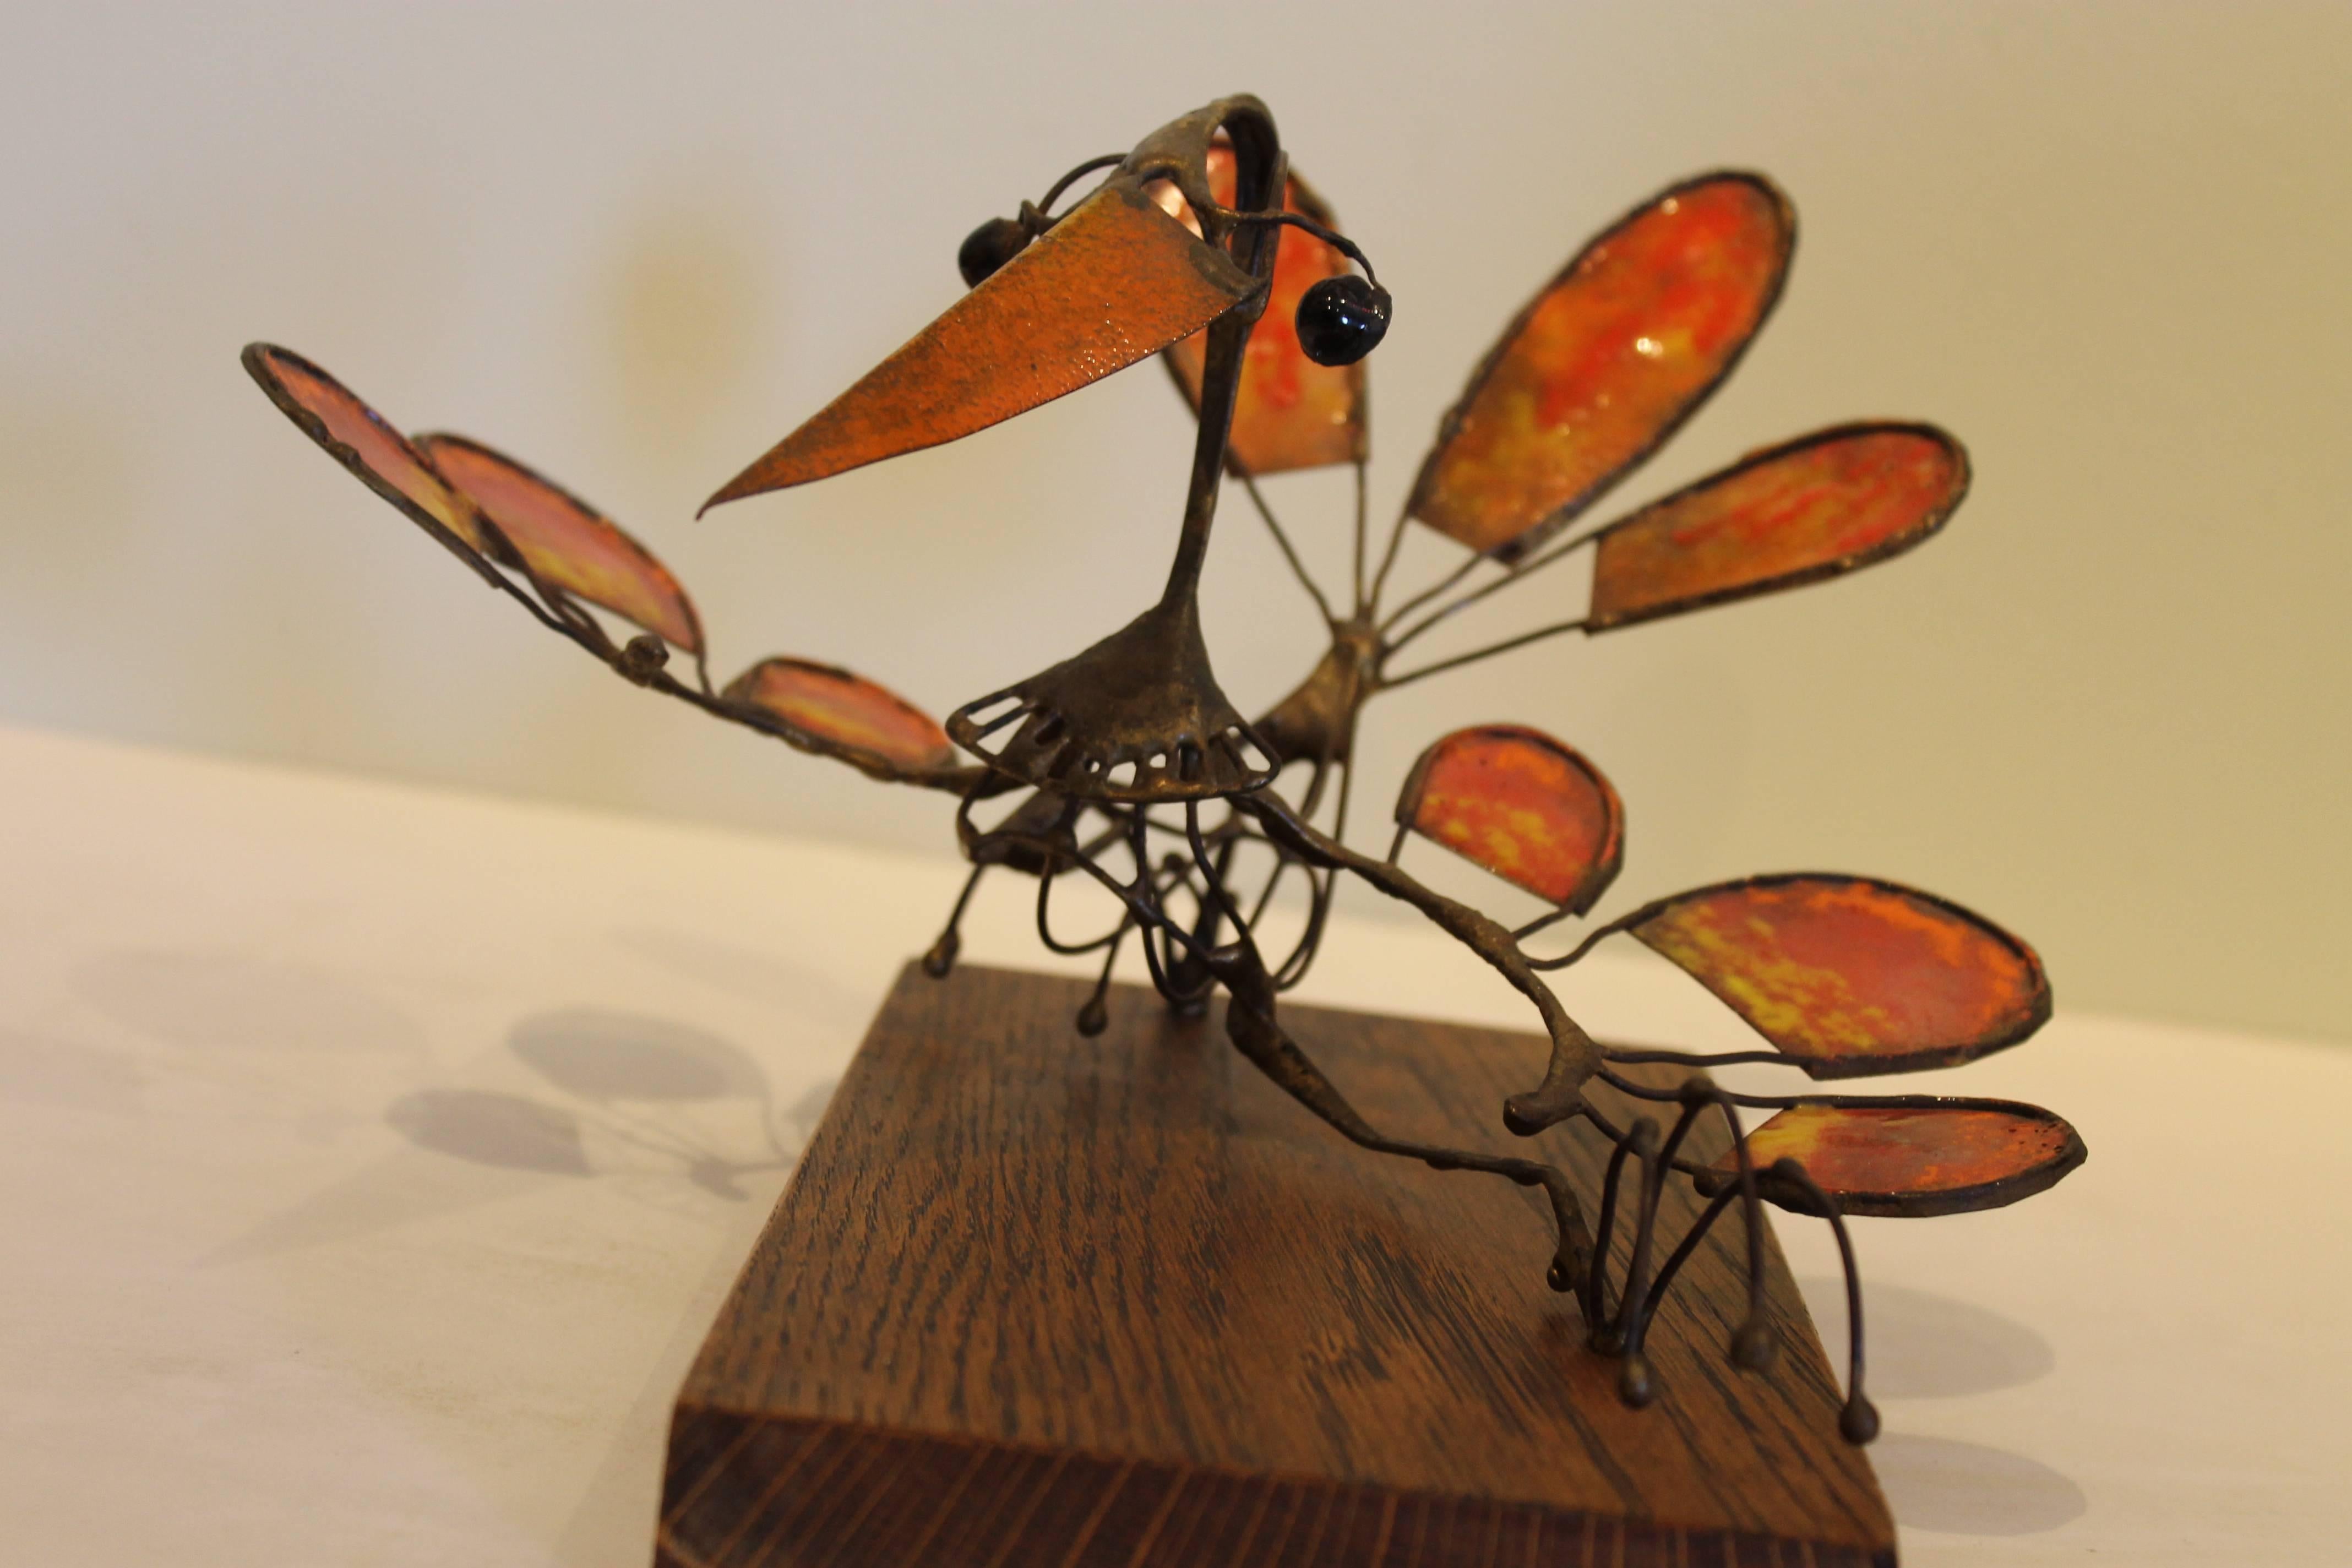 American Copper and Enamel Bird Sculpture by Russ Shears